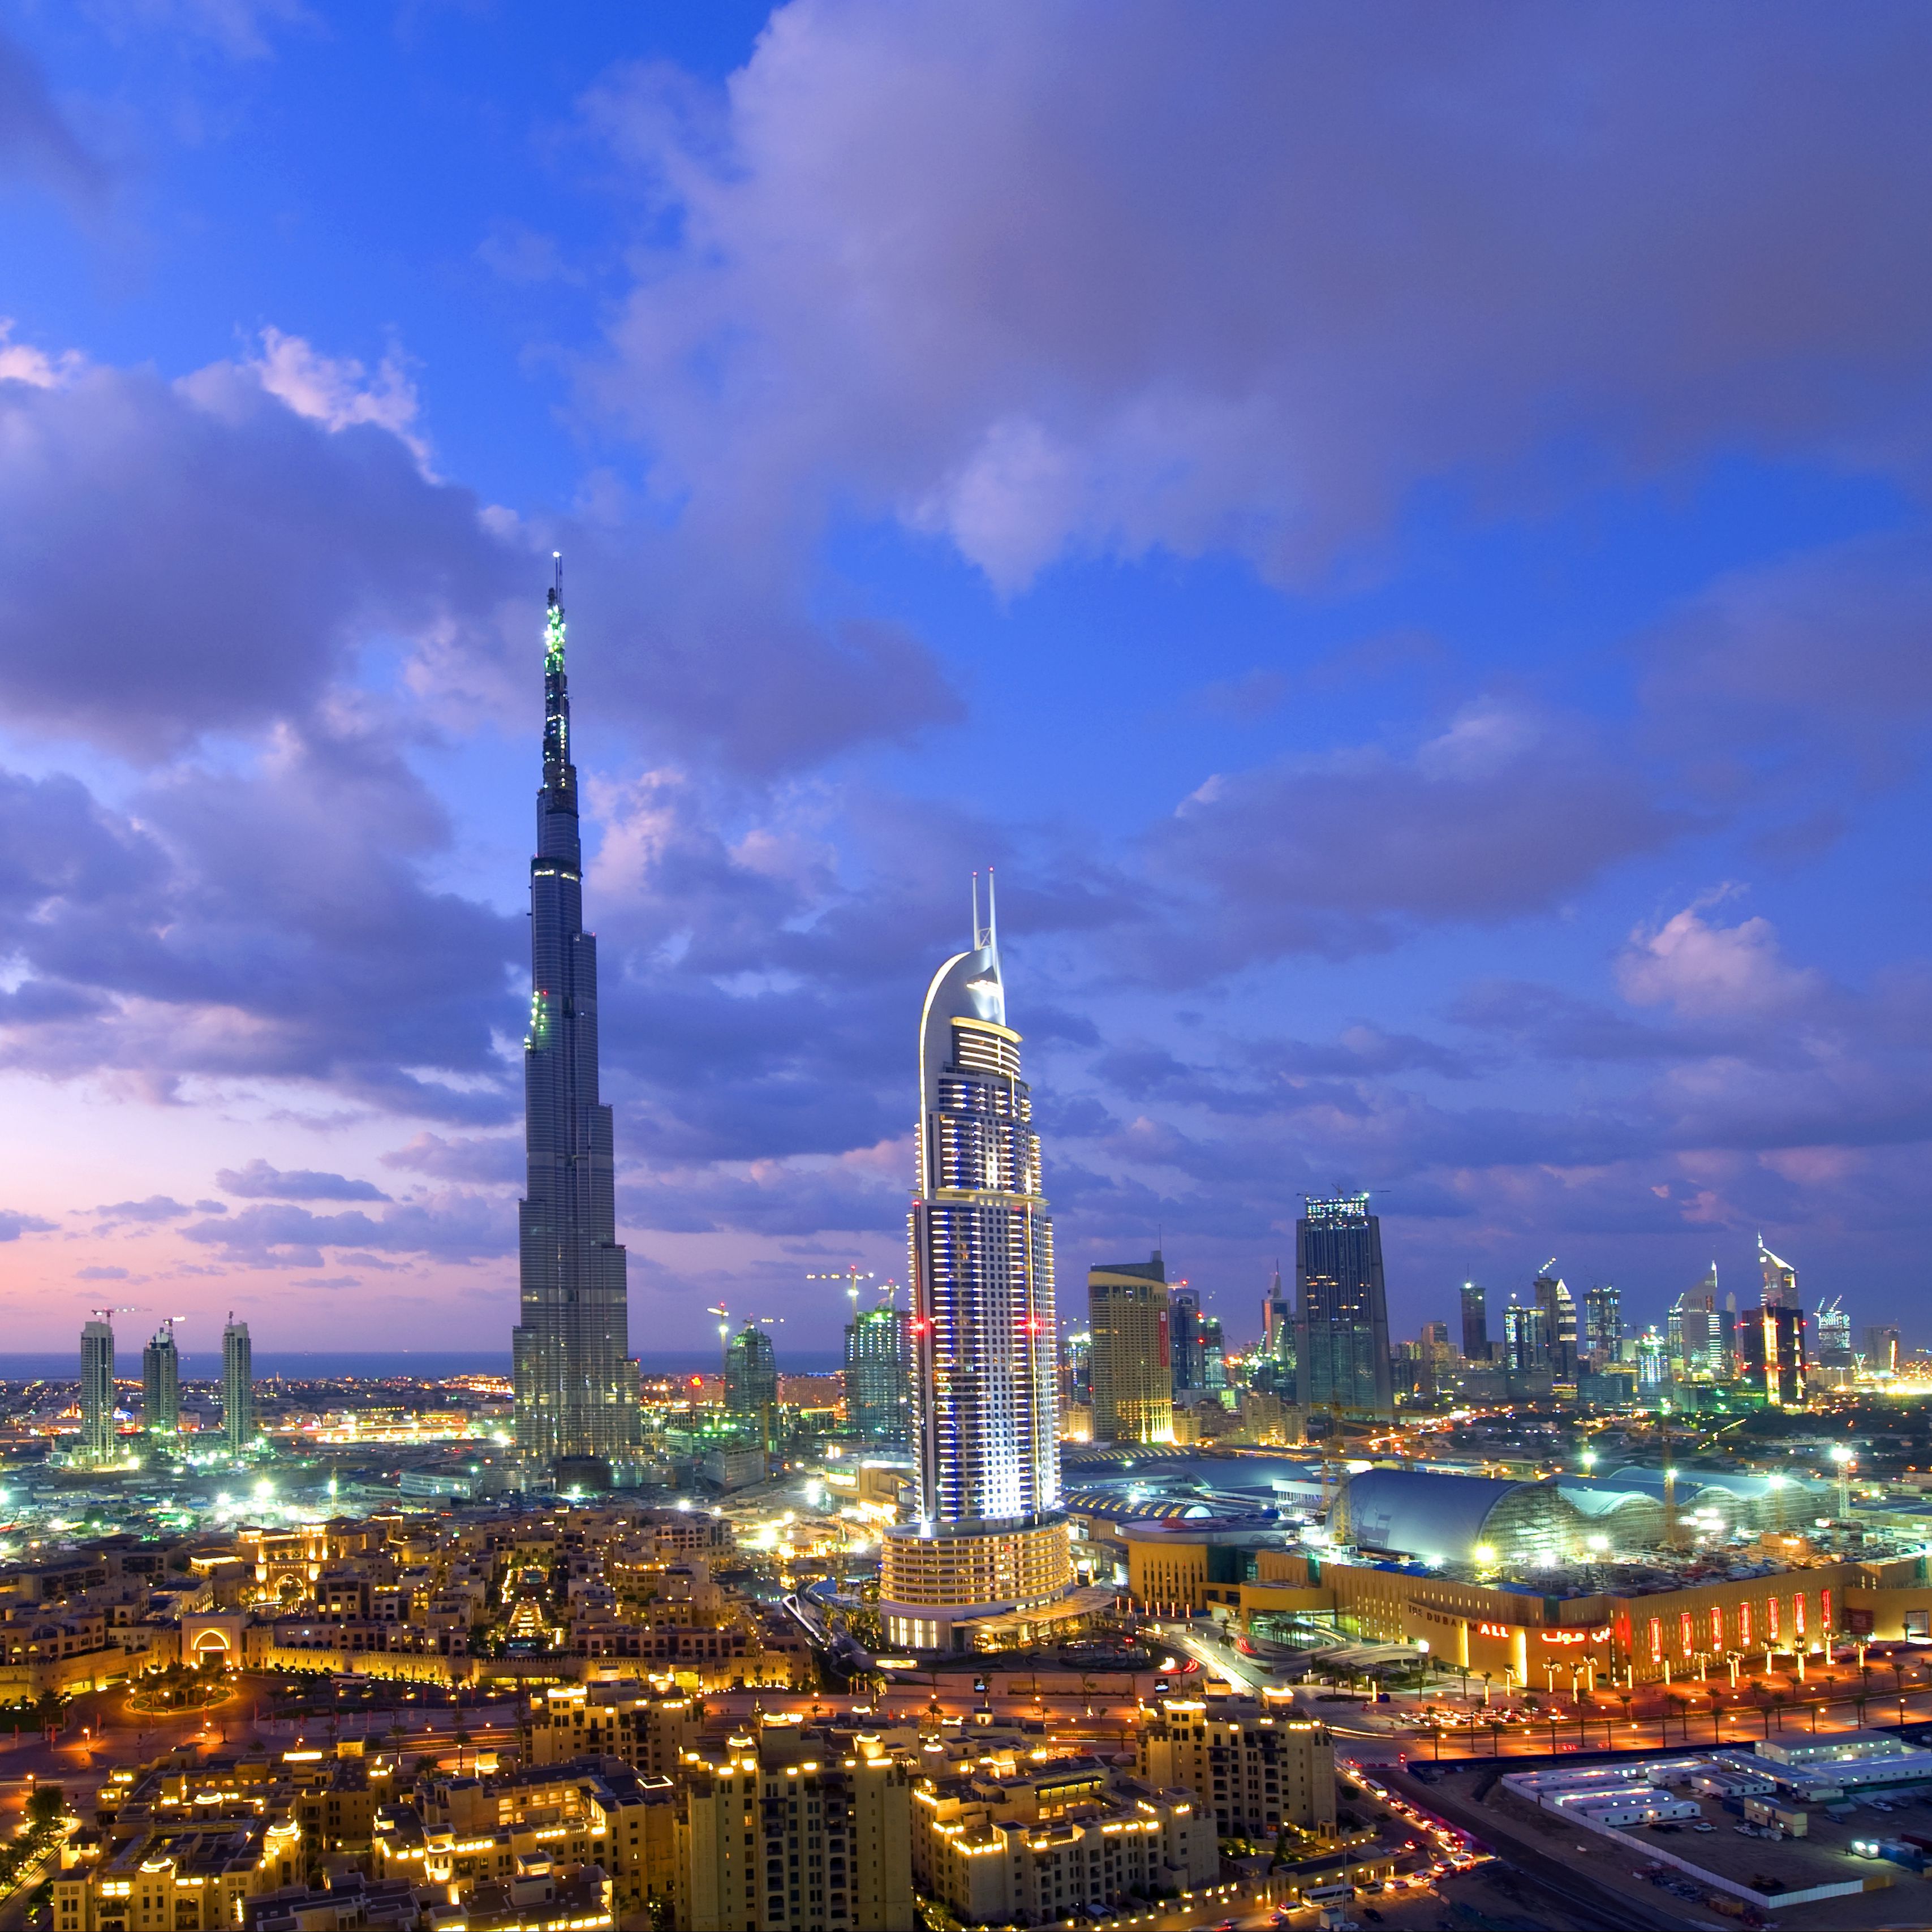 Download wallpaper 3415x3415 dubai, building, view from the top, view, city  lights ipad pro 